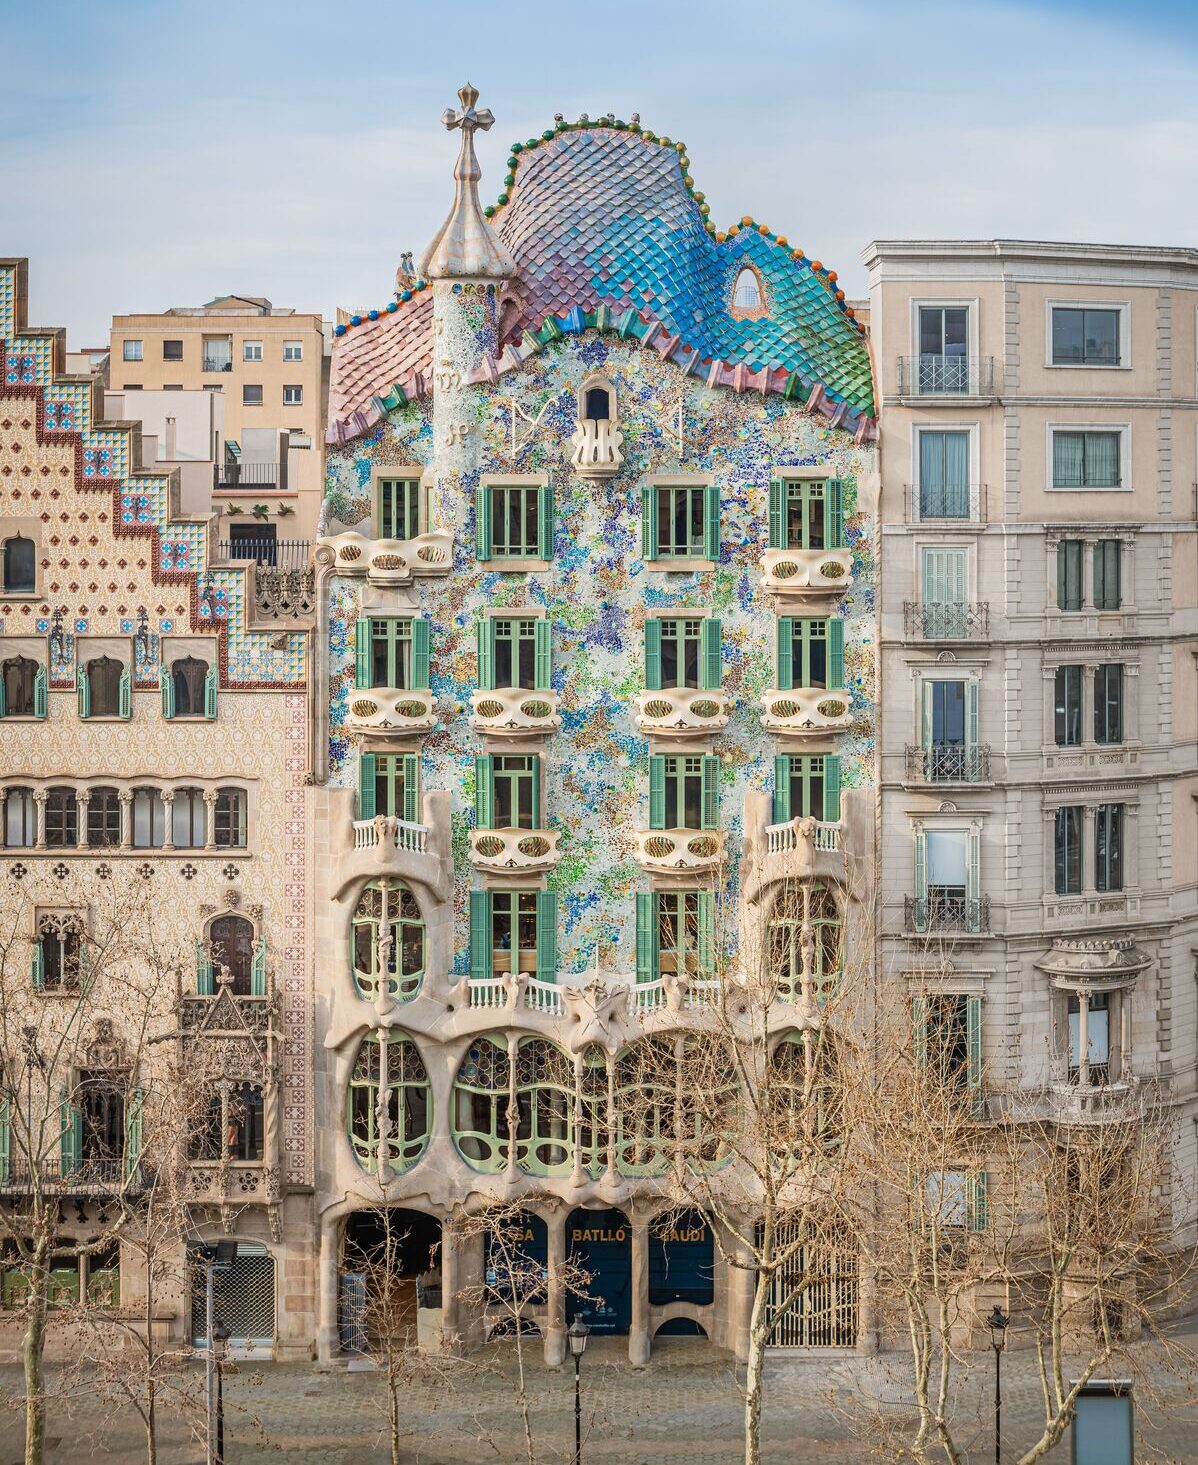 A street view of Casa Batlló, an apartment block designed by Gaudí in central Barcelona